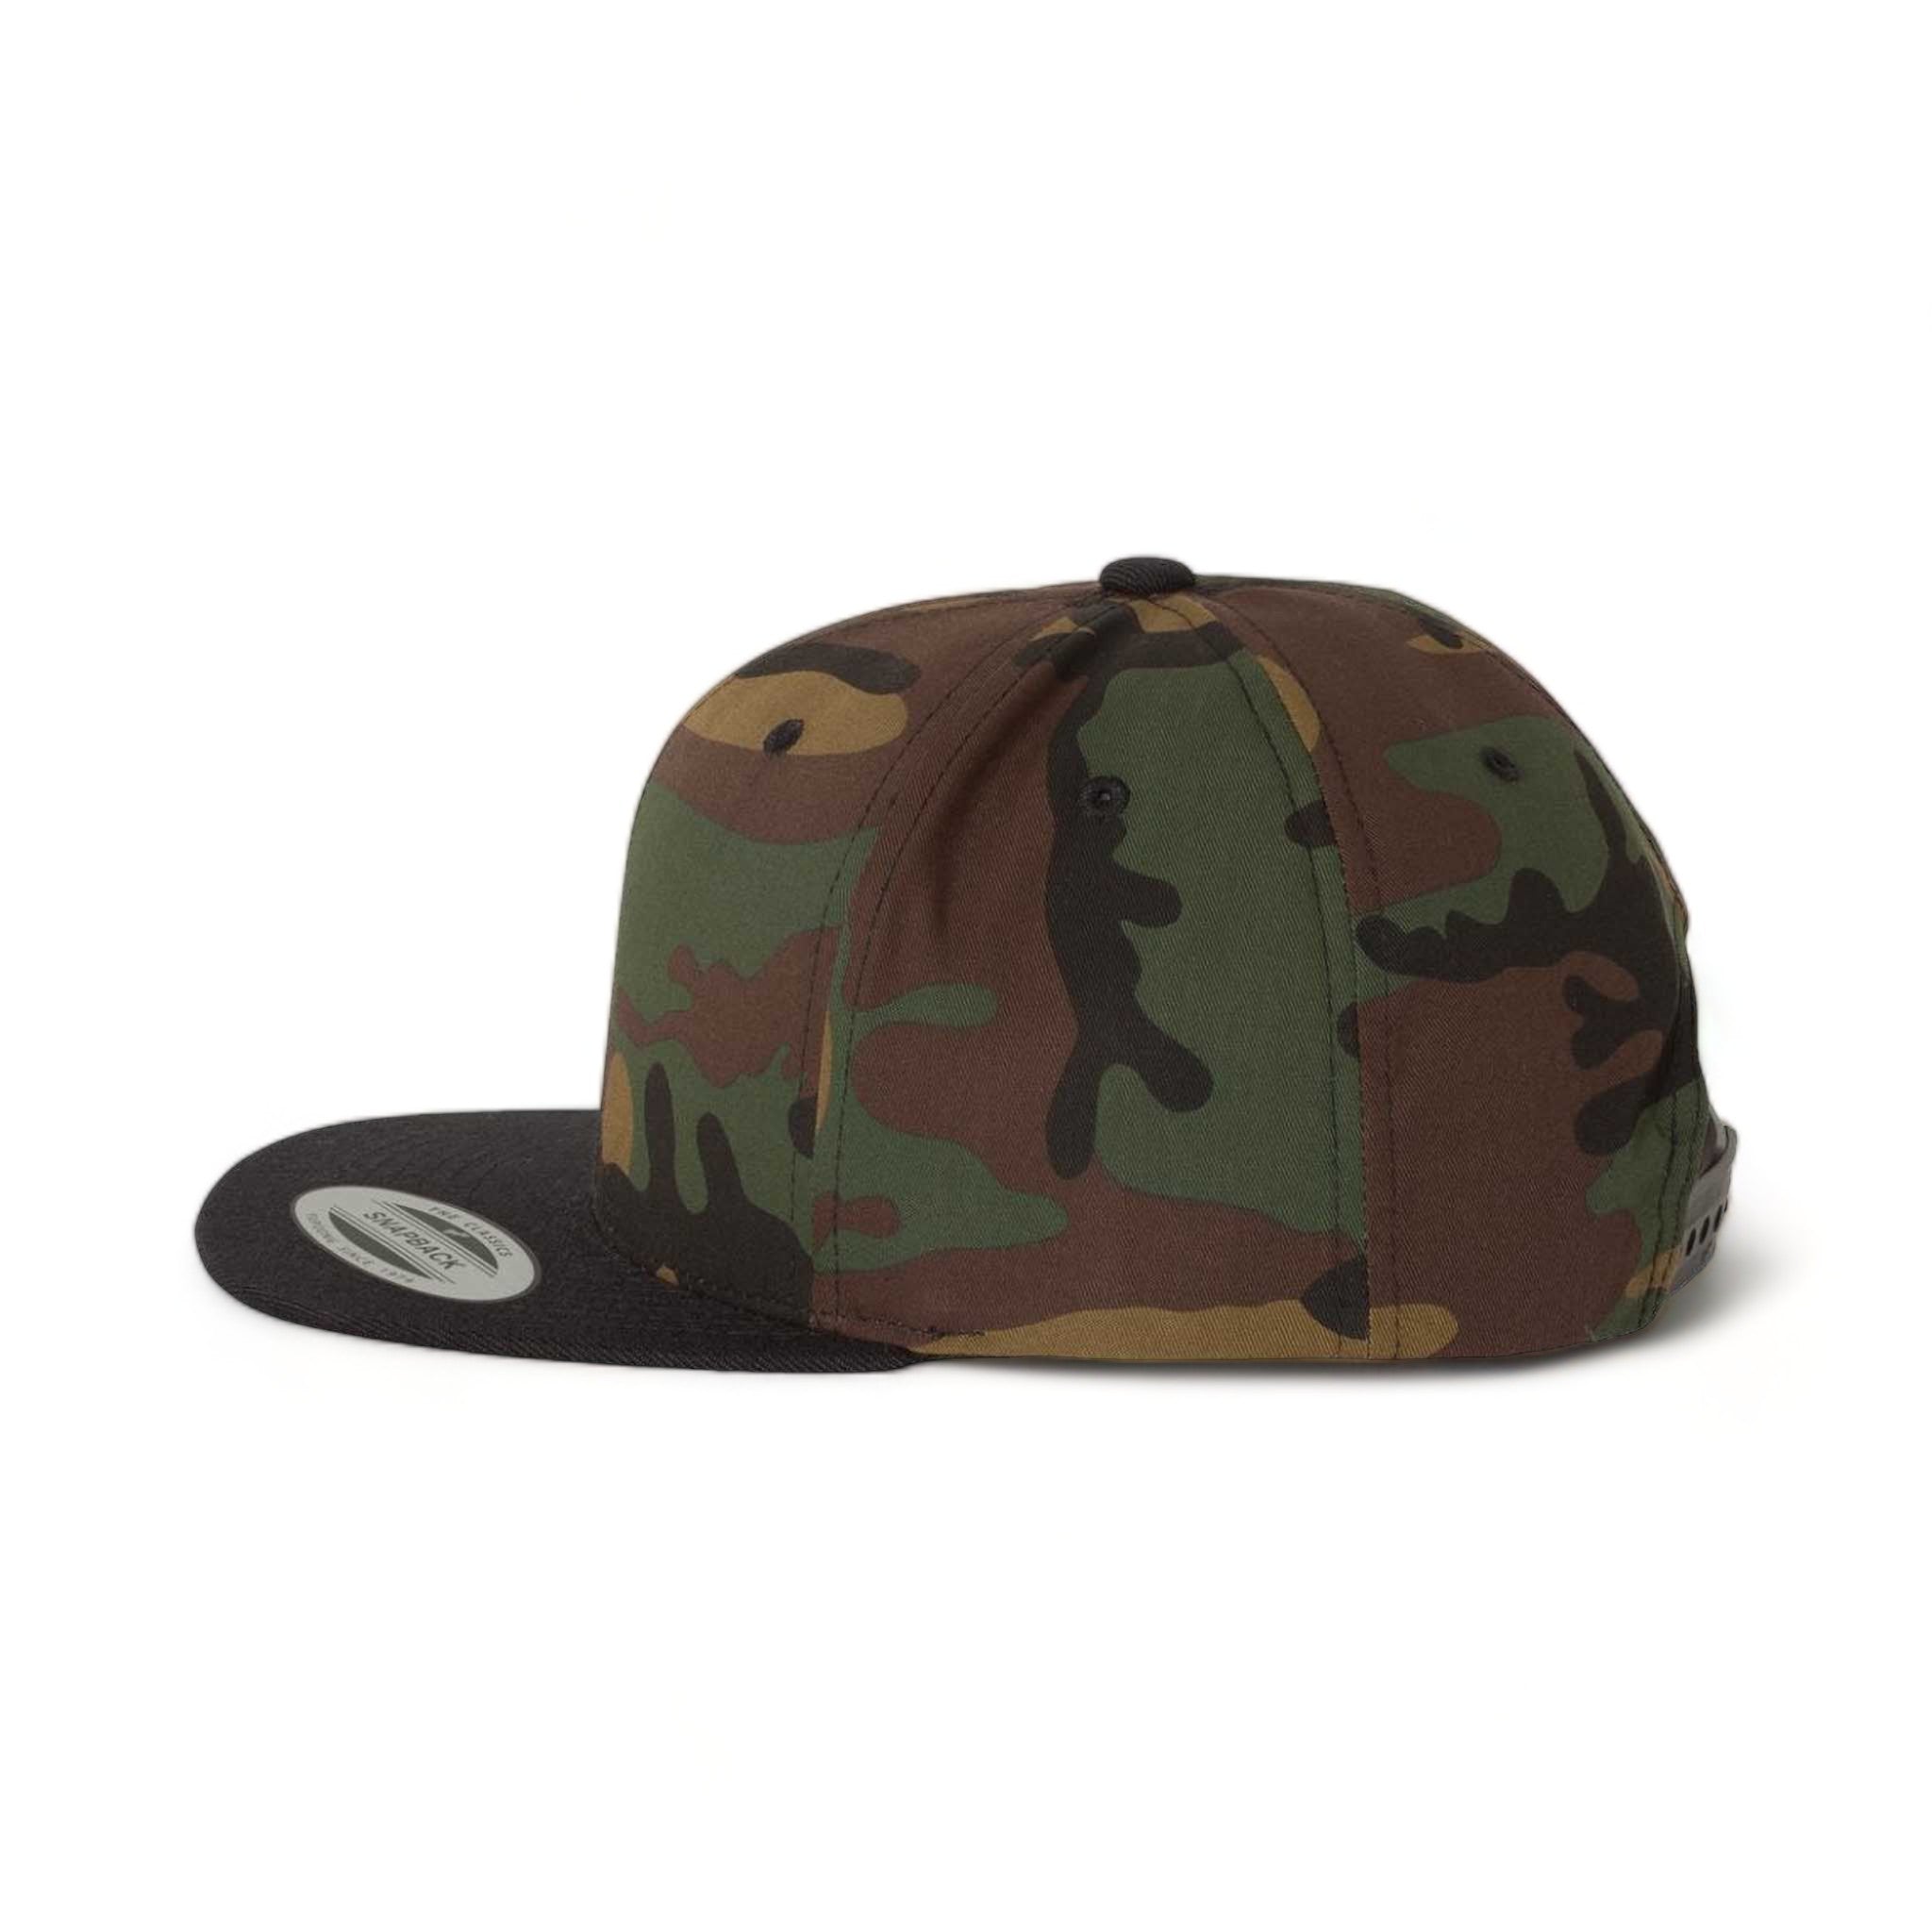 Side view of YP Classics 6089M custom hat in camo and black